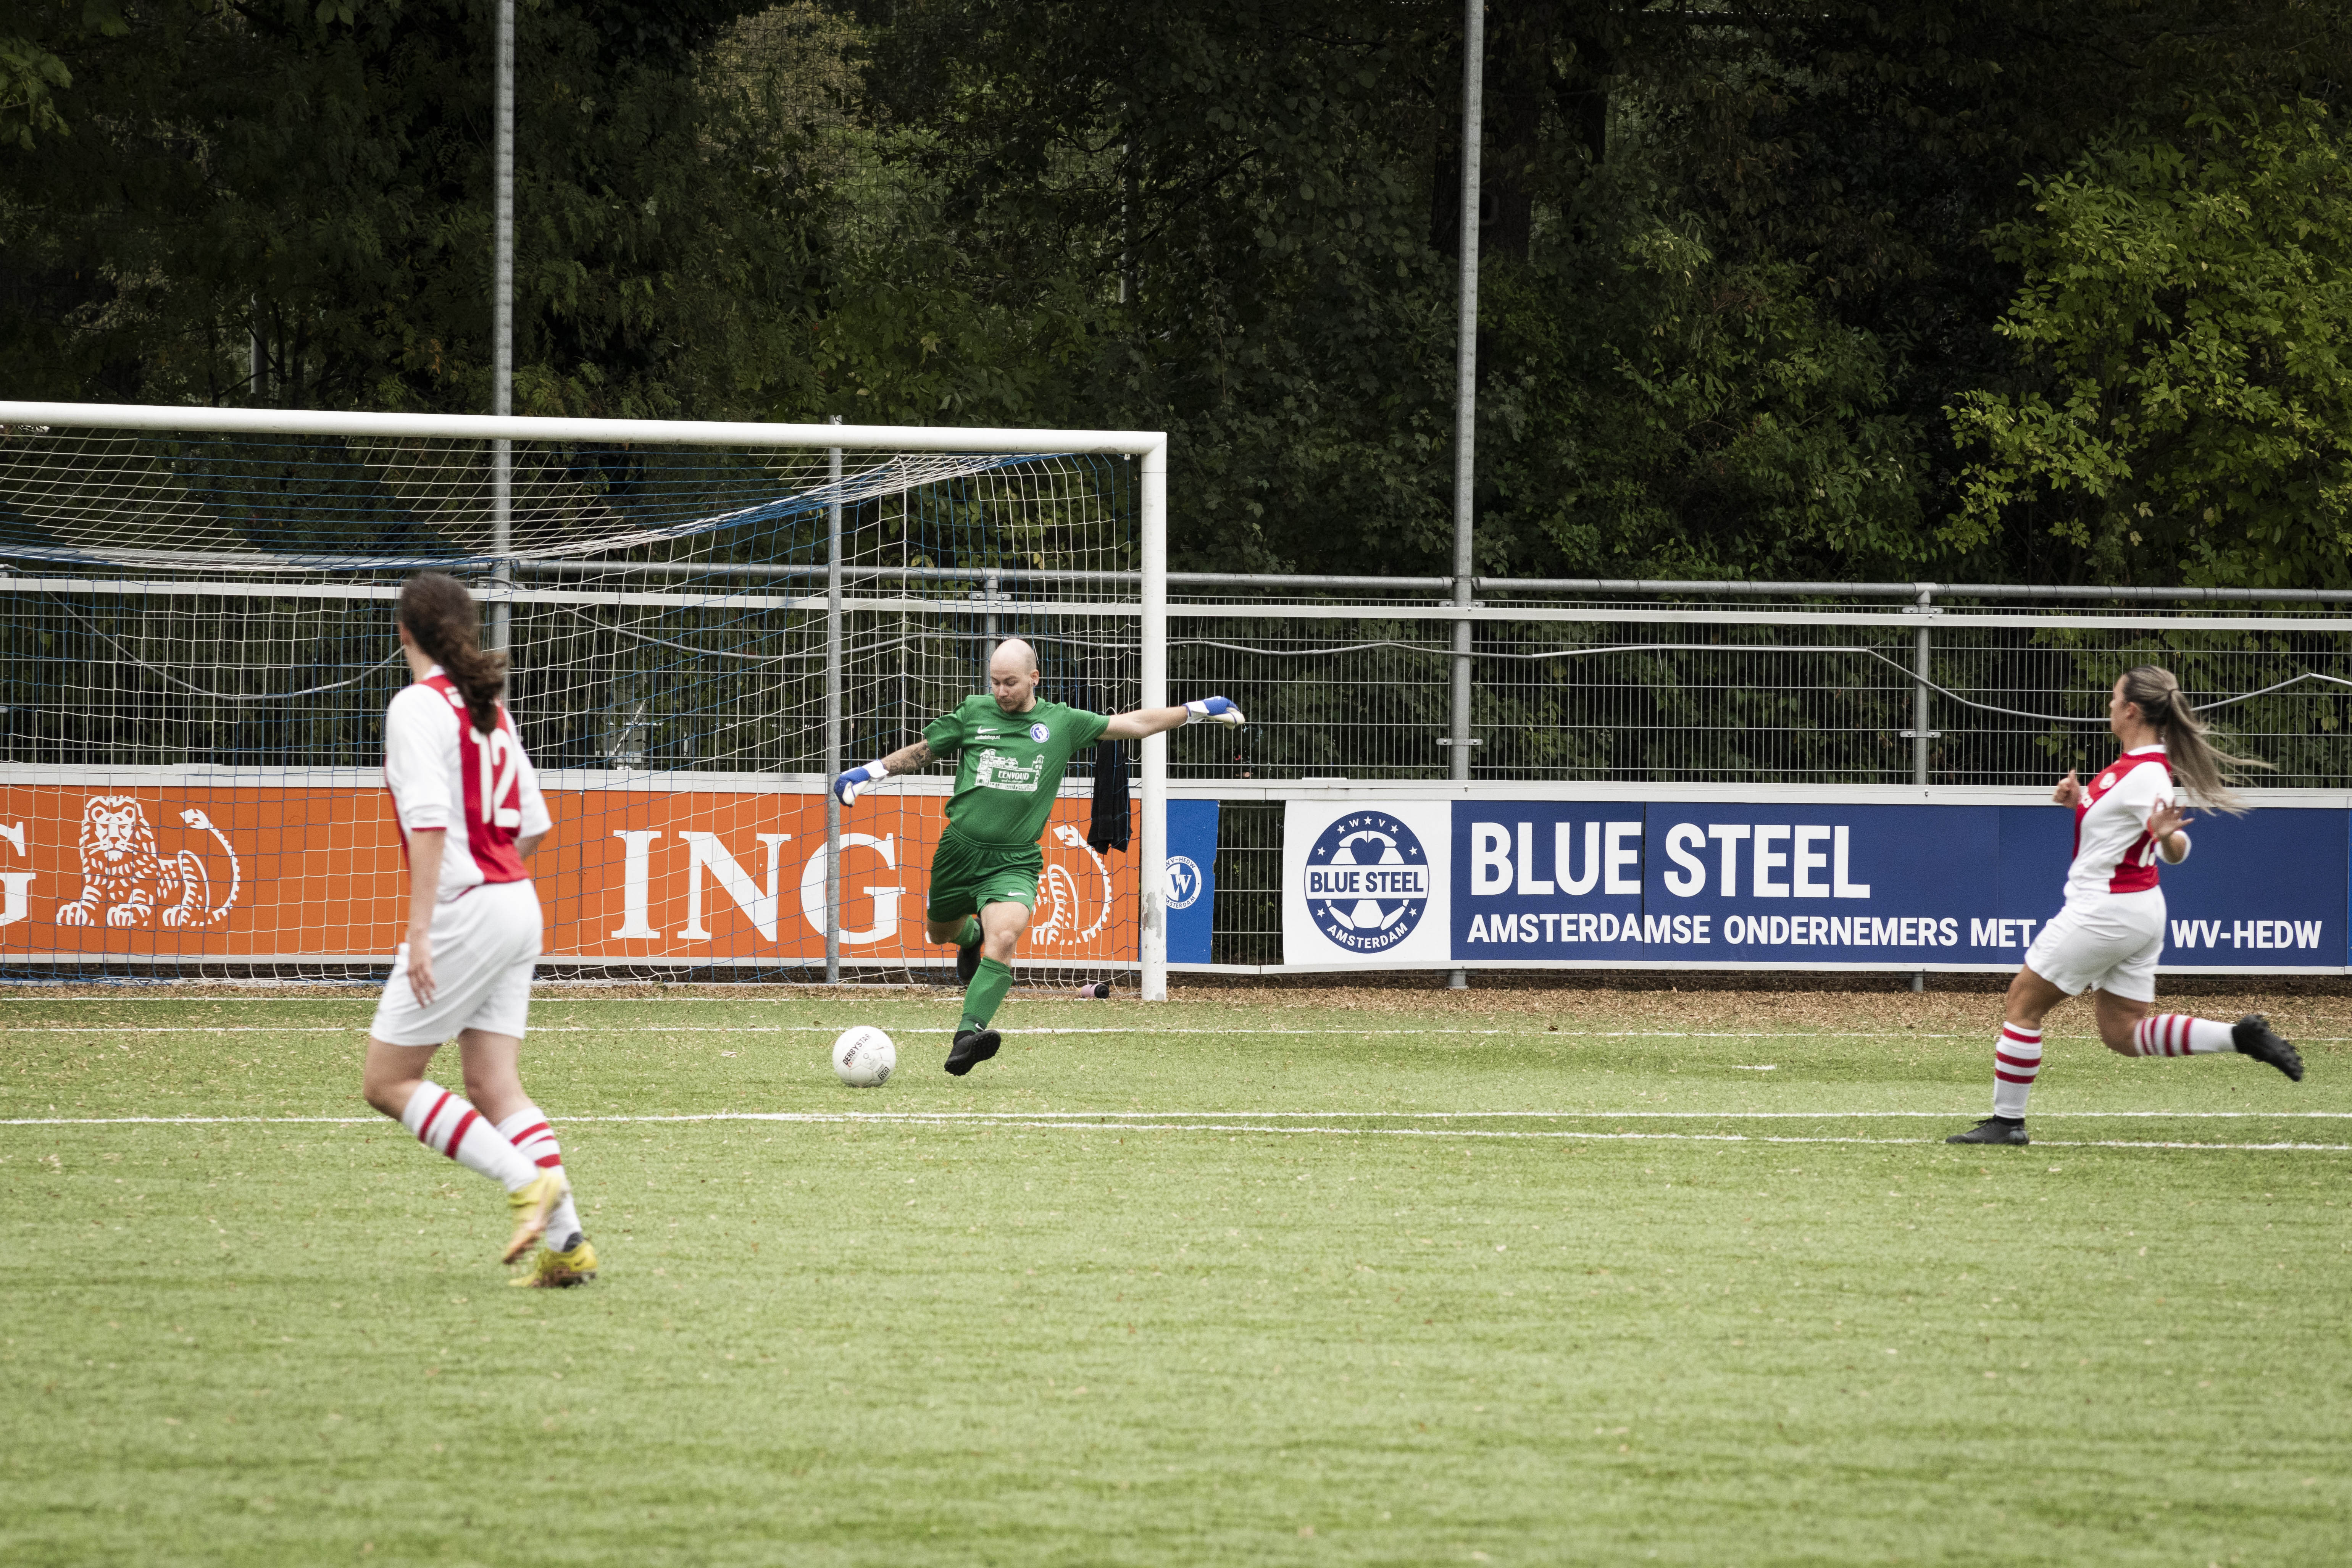 action photo of three people playing football, the keeper wears a green jersey and is about to kick the ball and two opponents are running in a red and white jersey